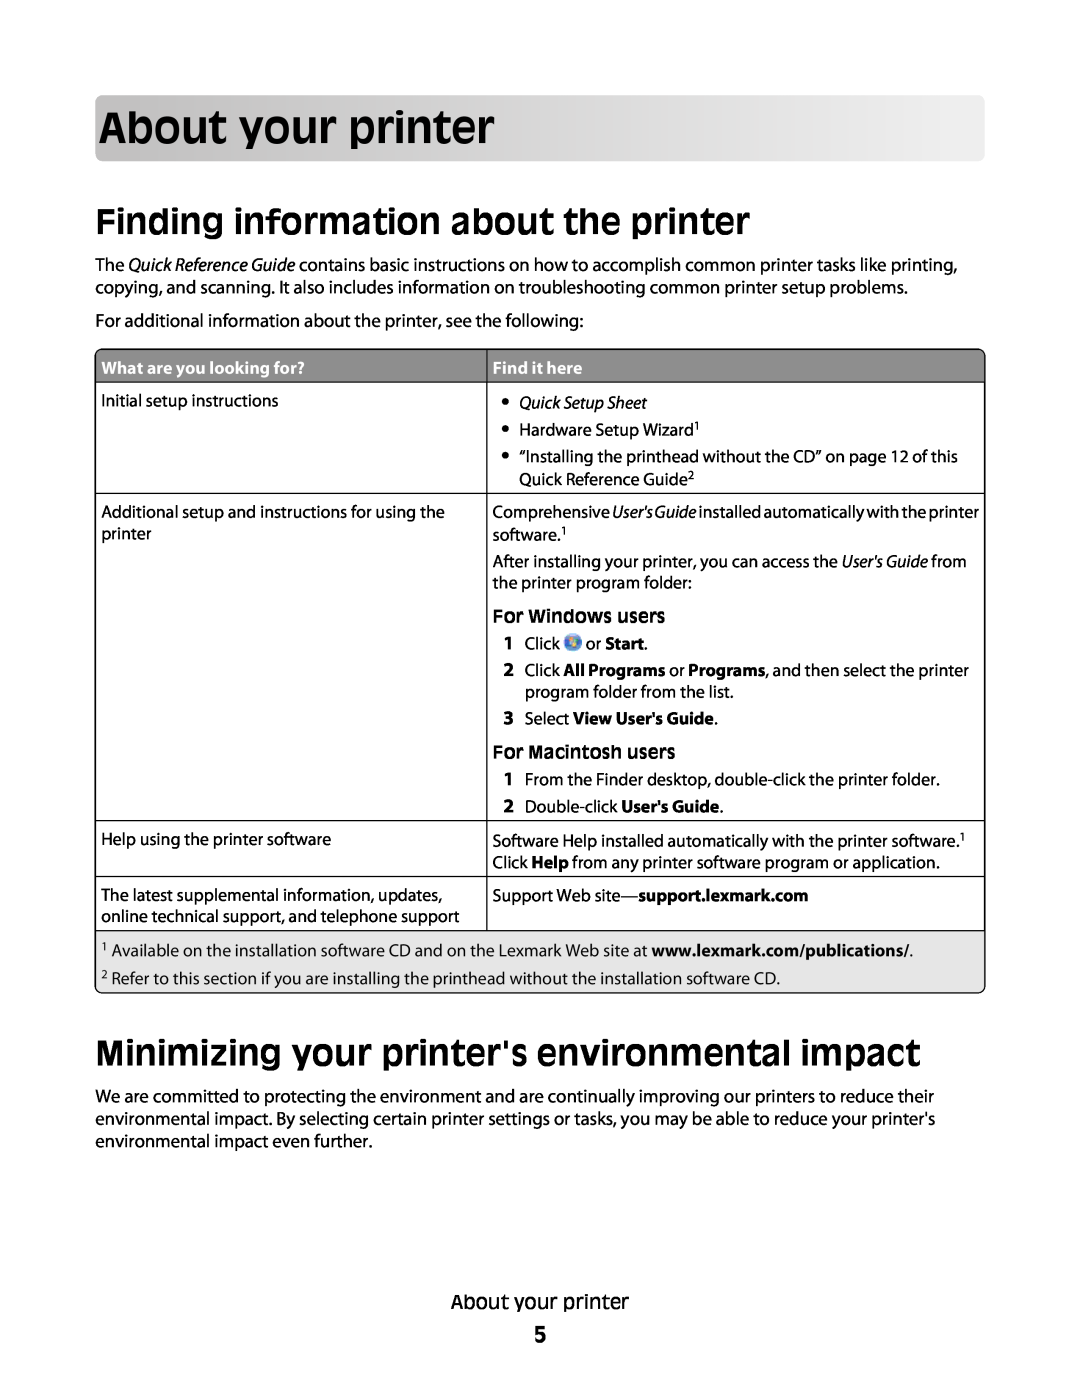 Lexmark S300 About your printer, Finding information about the printer, Minimizing your printers environmental impact 